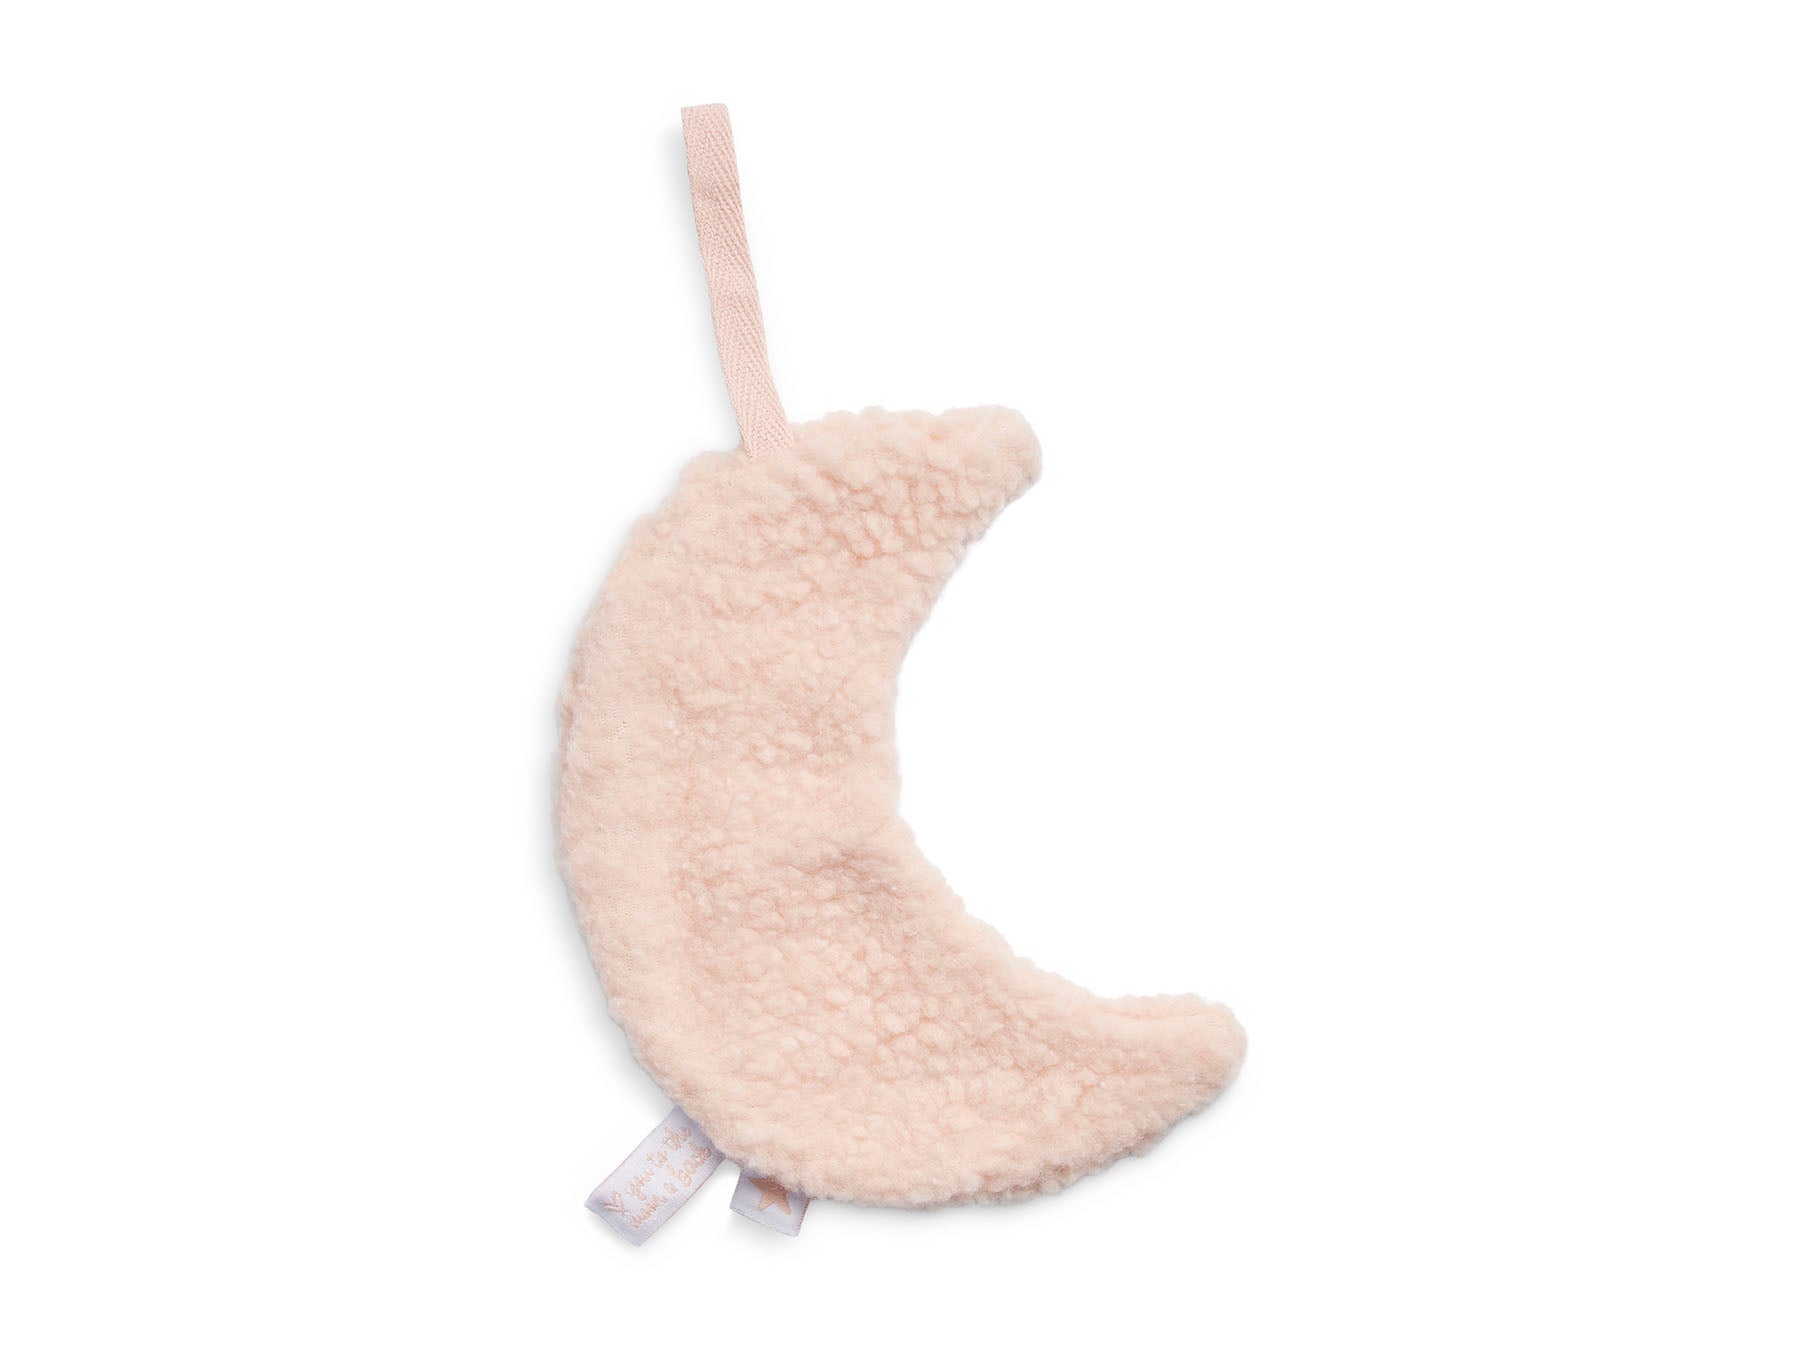  pale pink llama-shaped pacifier cloth made of soft teddy fabric with a loop for attaching to a pacifier